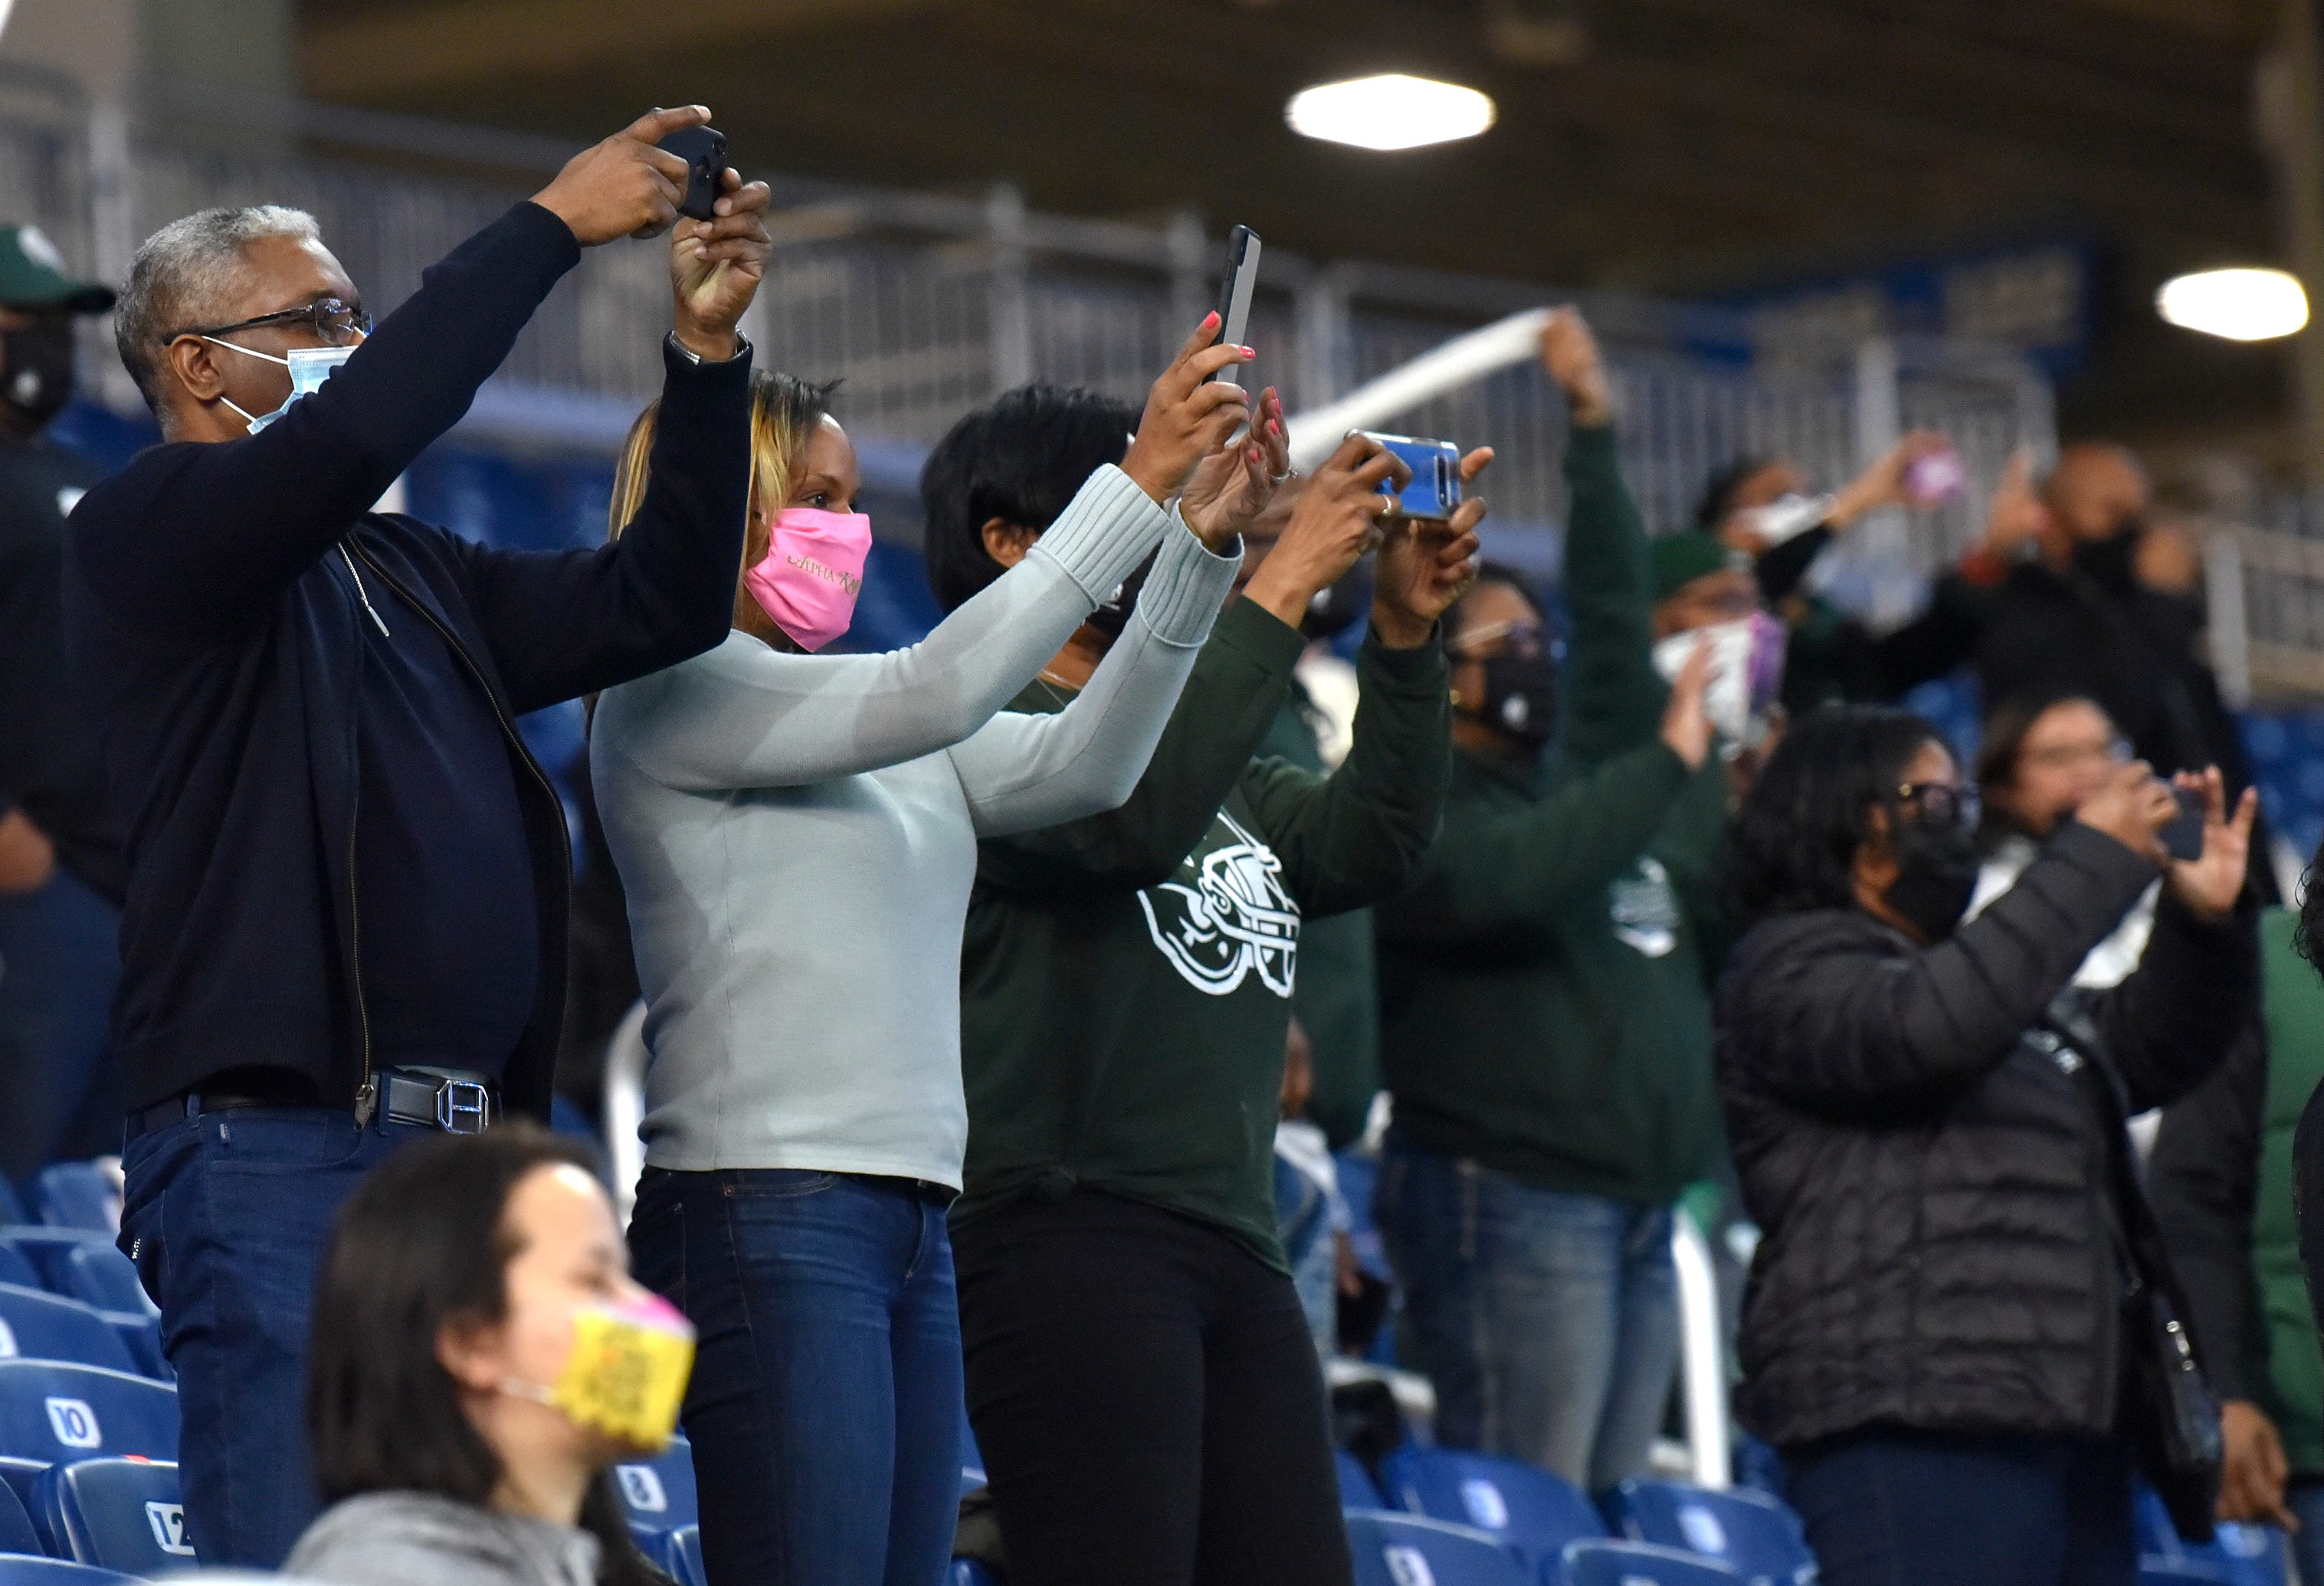 West Bloomfield fans takes pictures of their team at the end of the game.